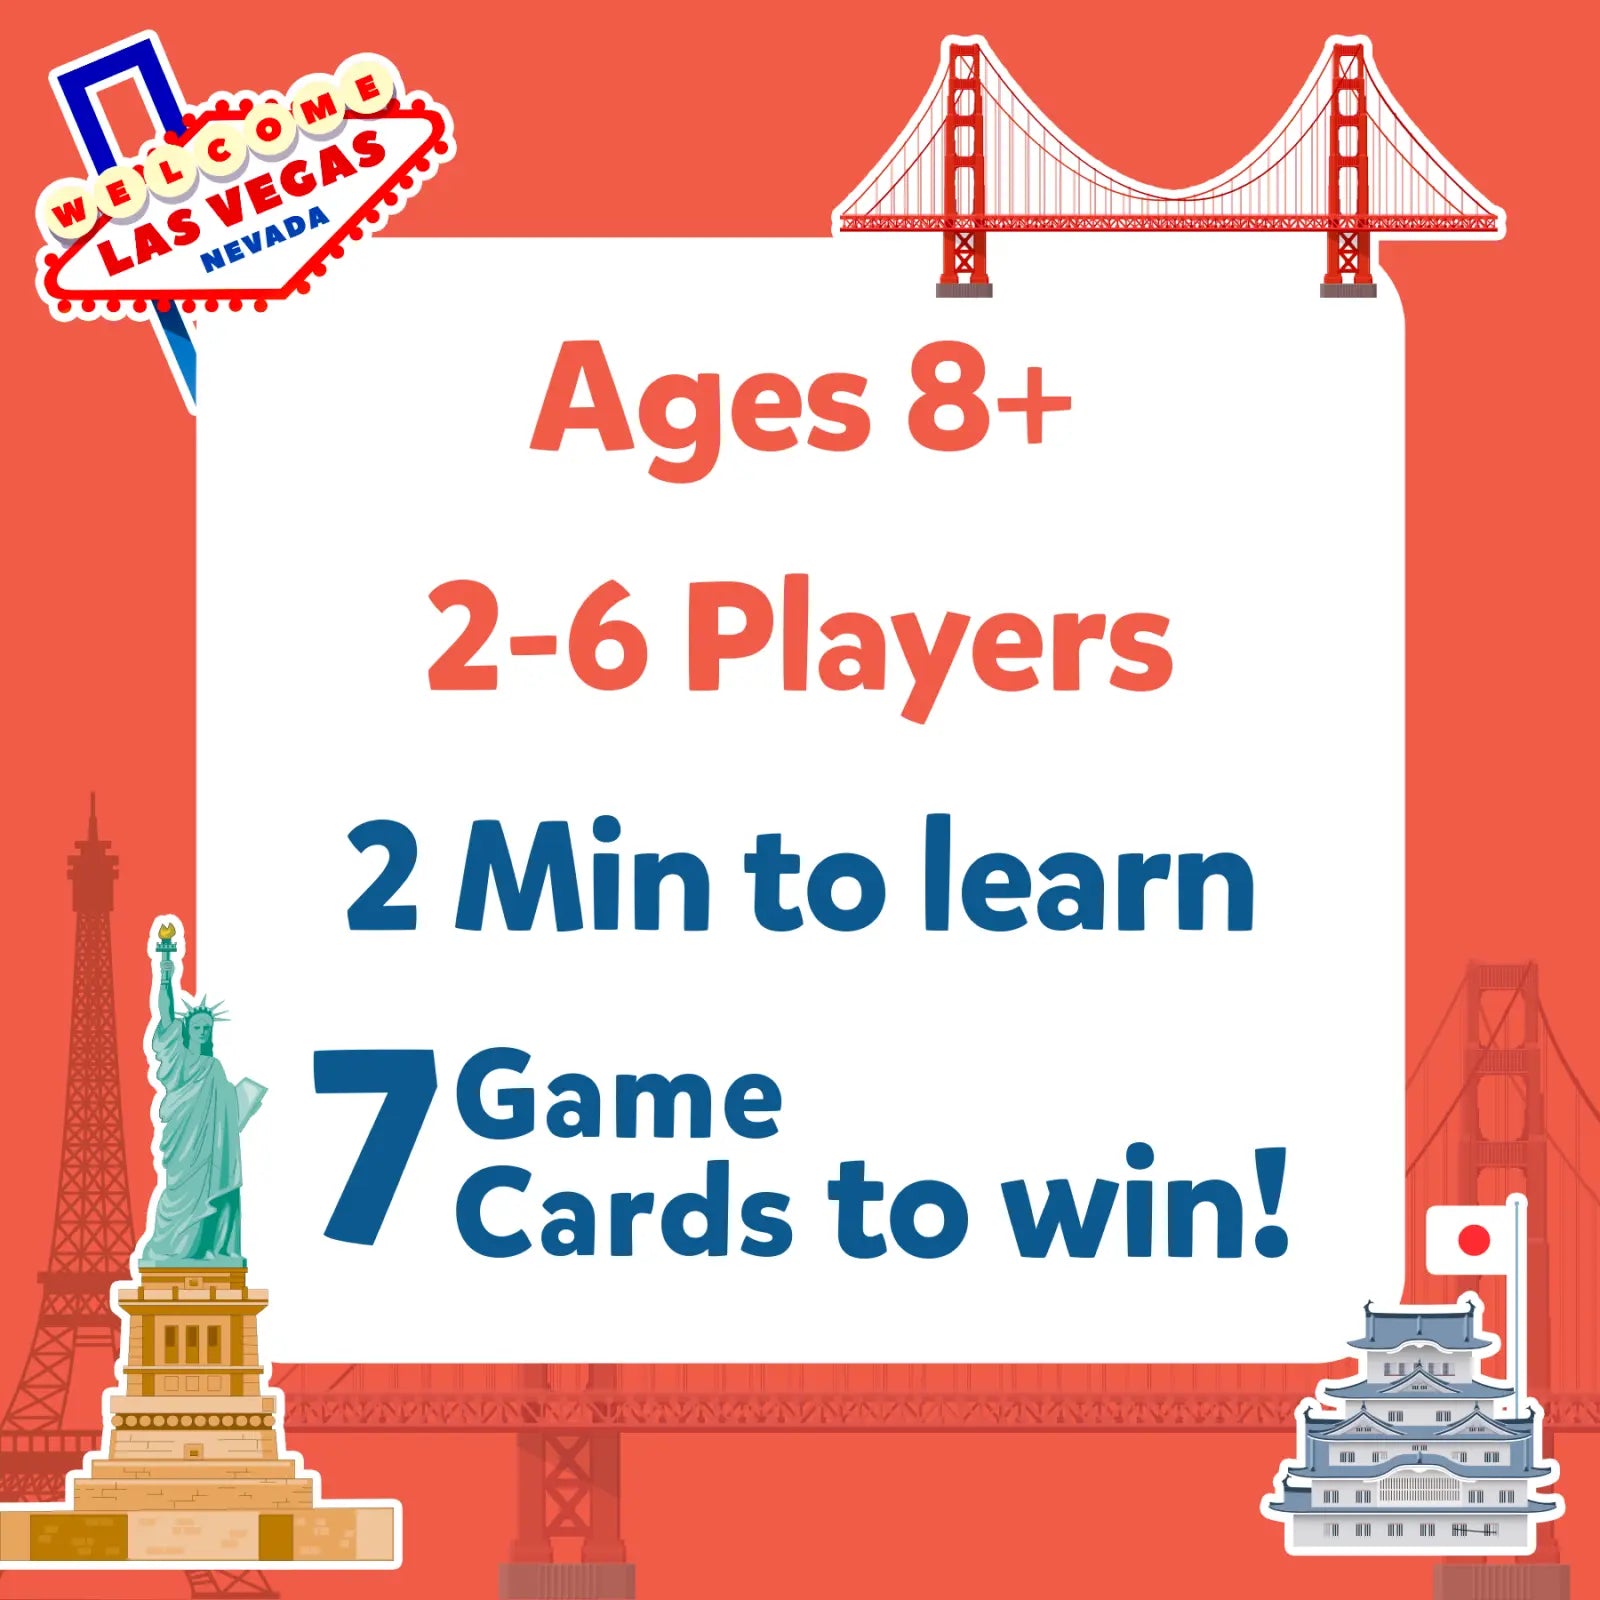 Guess in 10: Cities Around The World | Trivia card game (ages 8+)